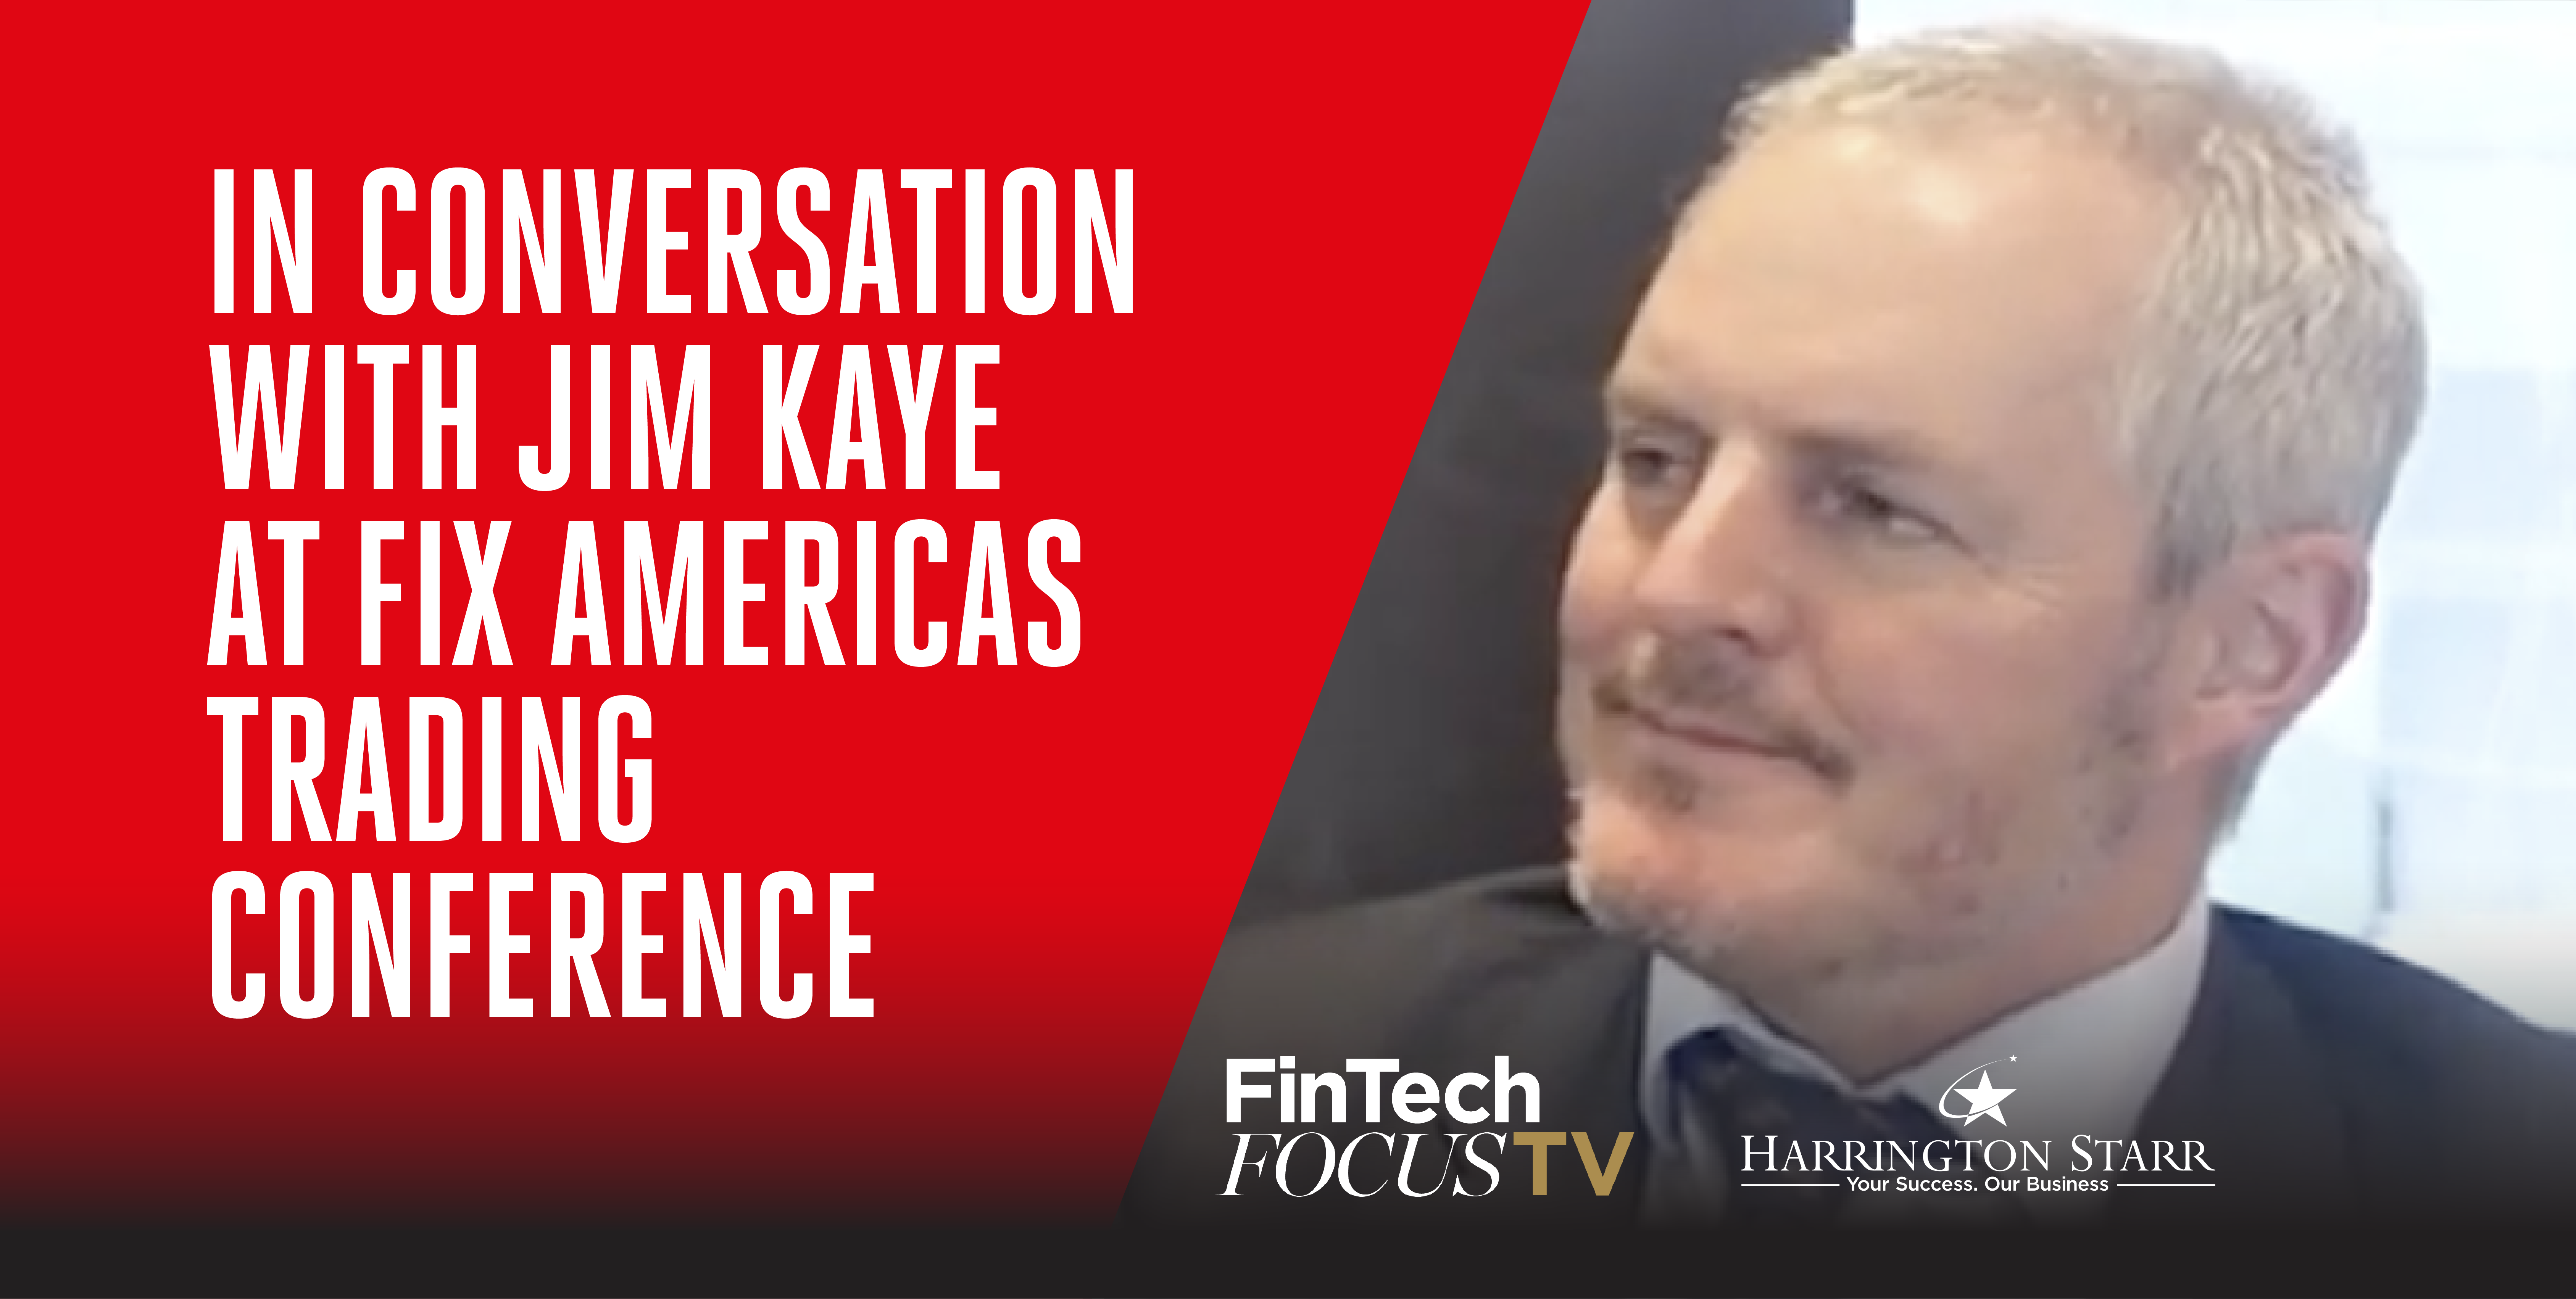 In Conversation with Jim Kaye at FIX Americas Trading Conference